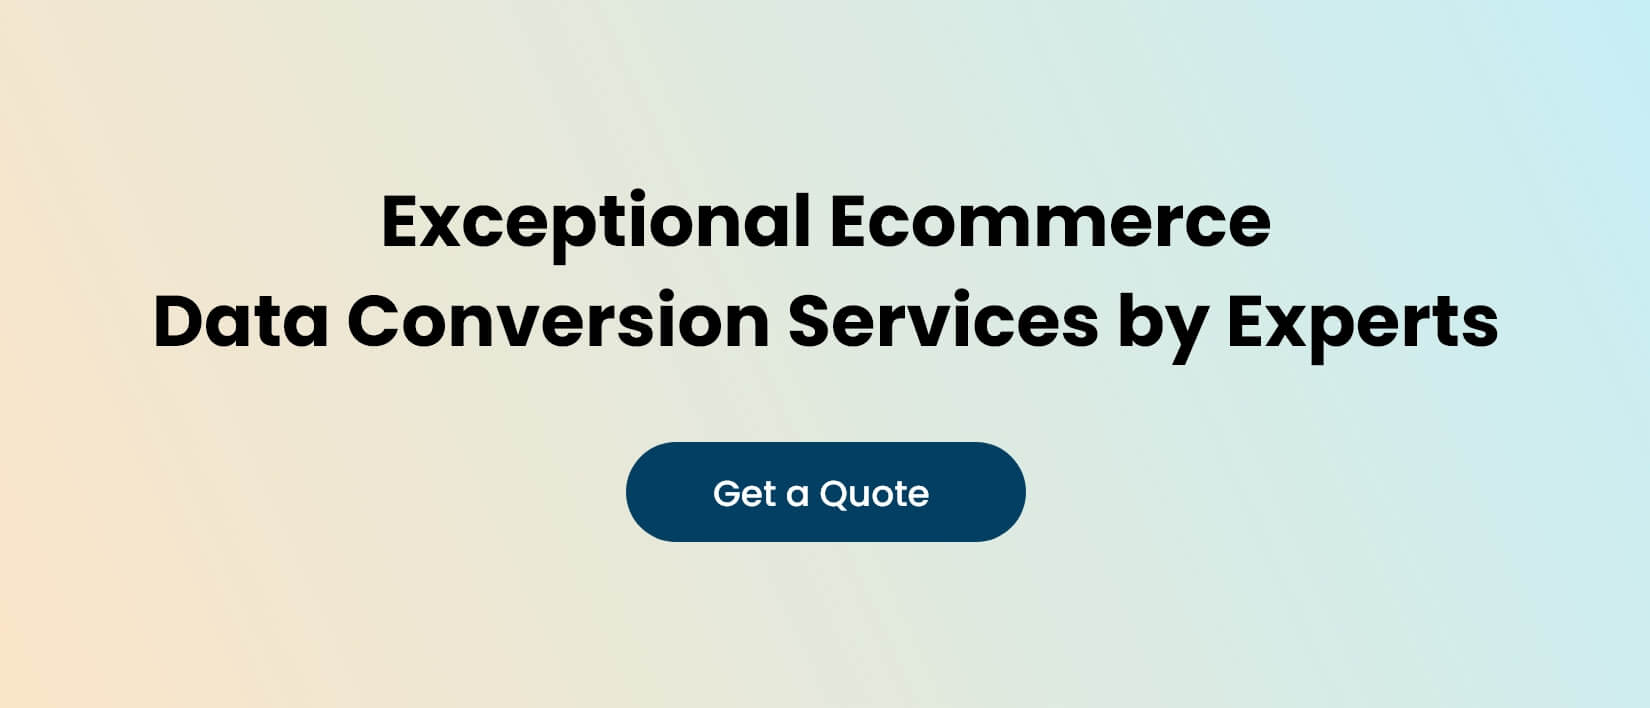 Exceptional EcommerceData Conversion Services by Experts